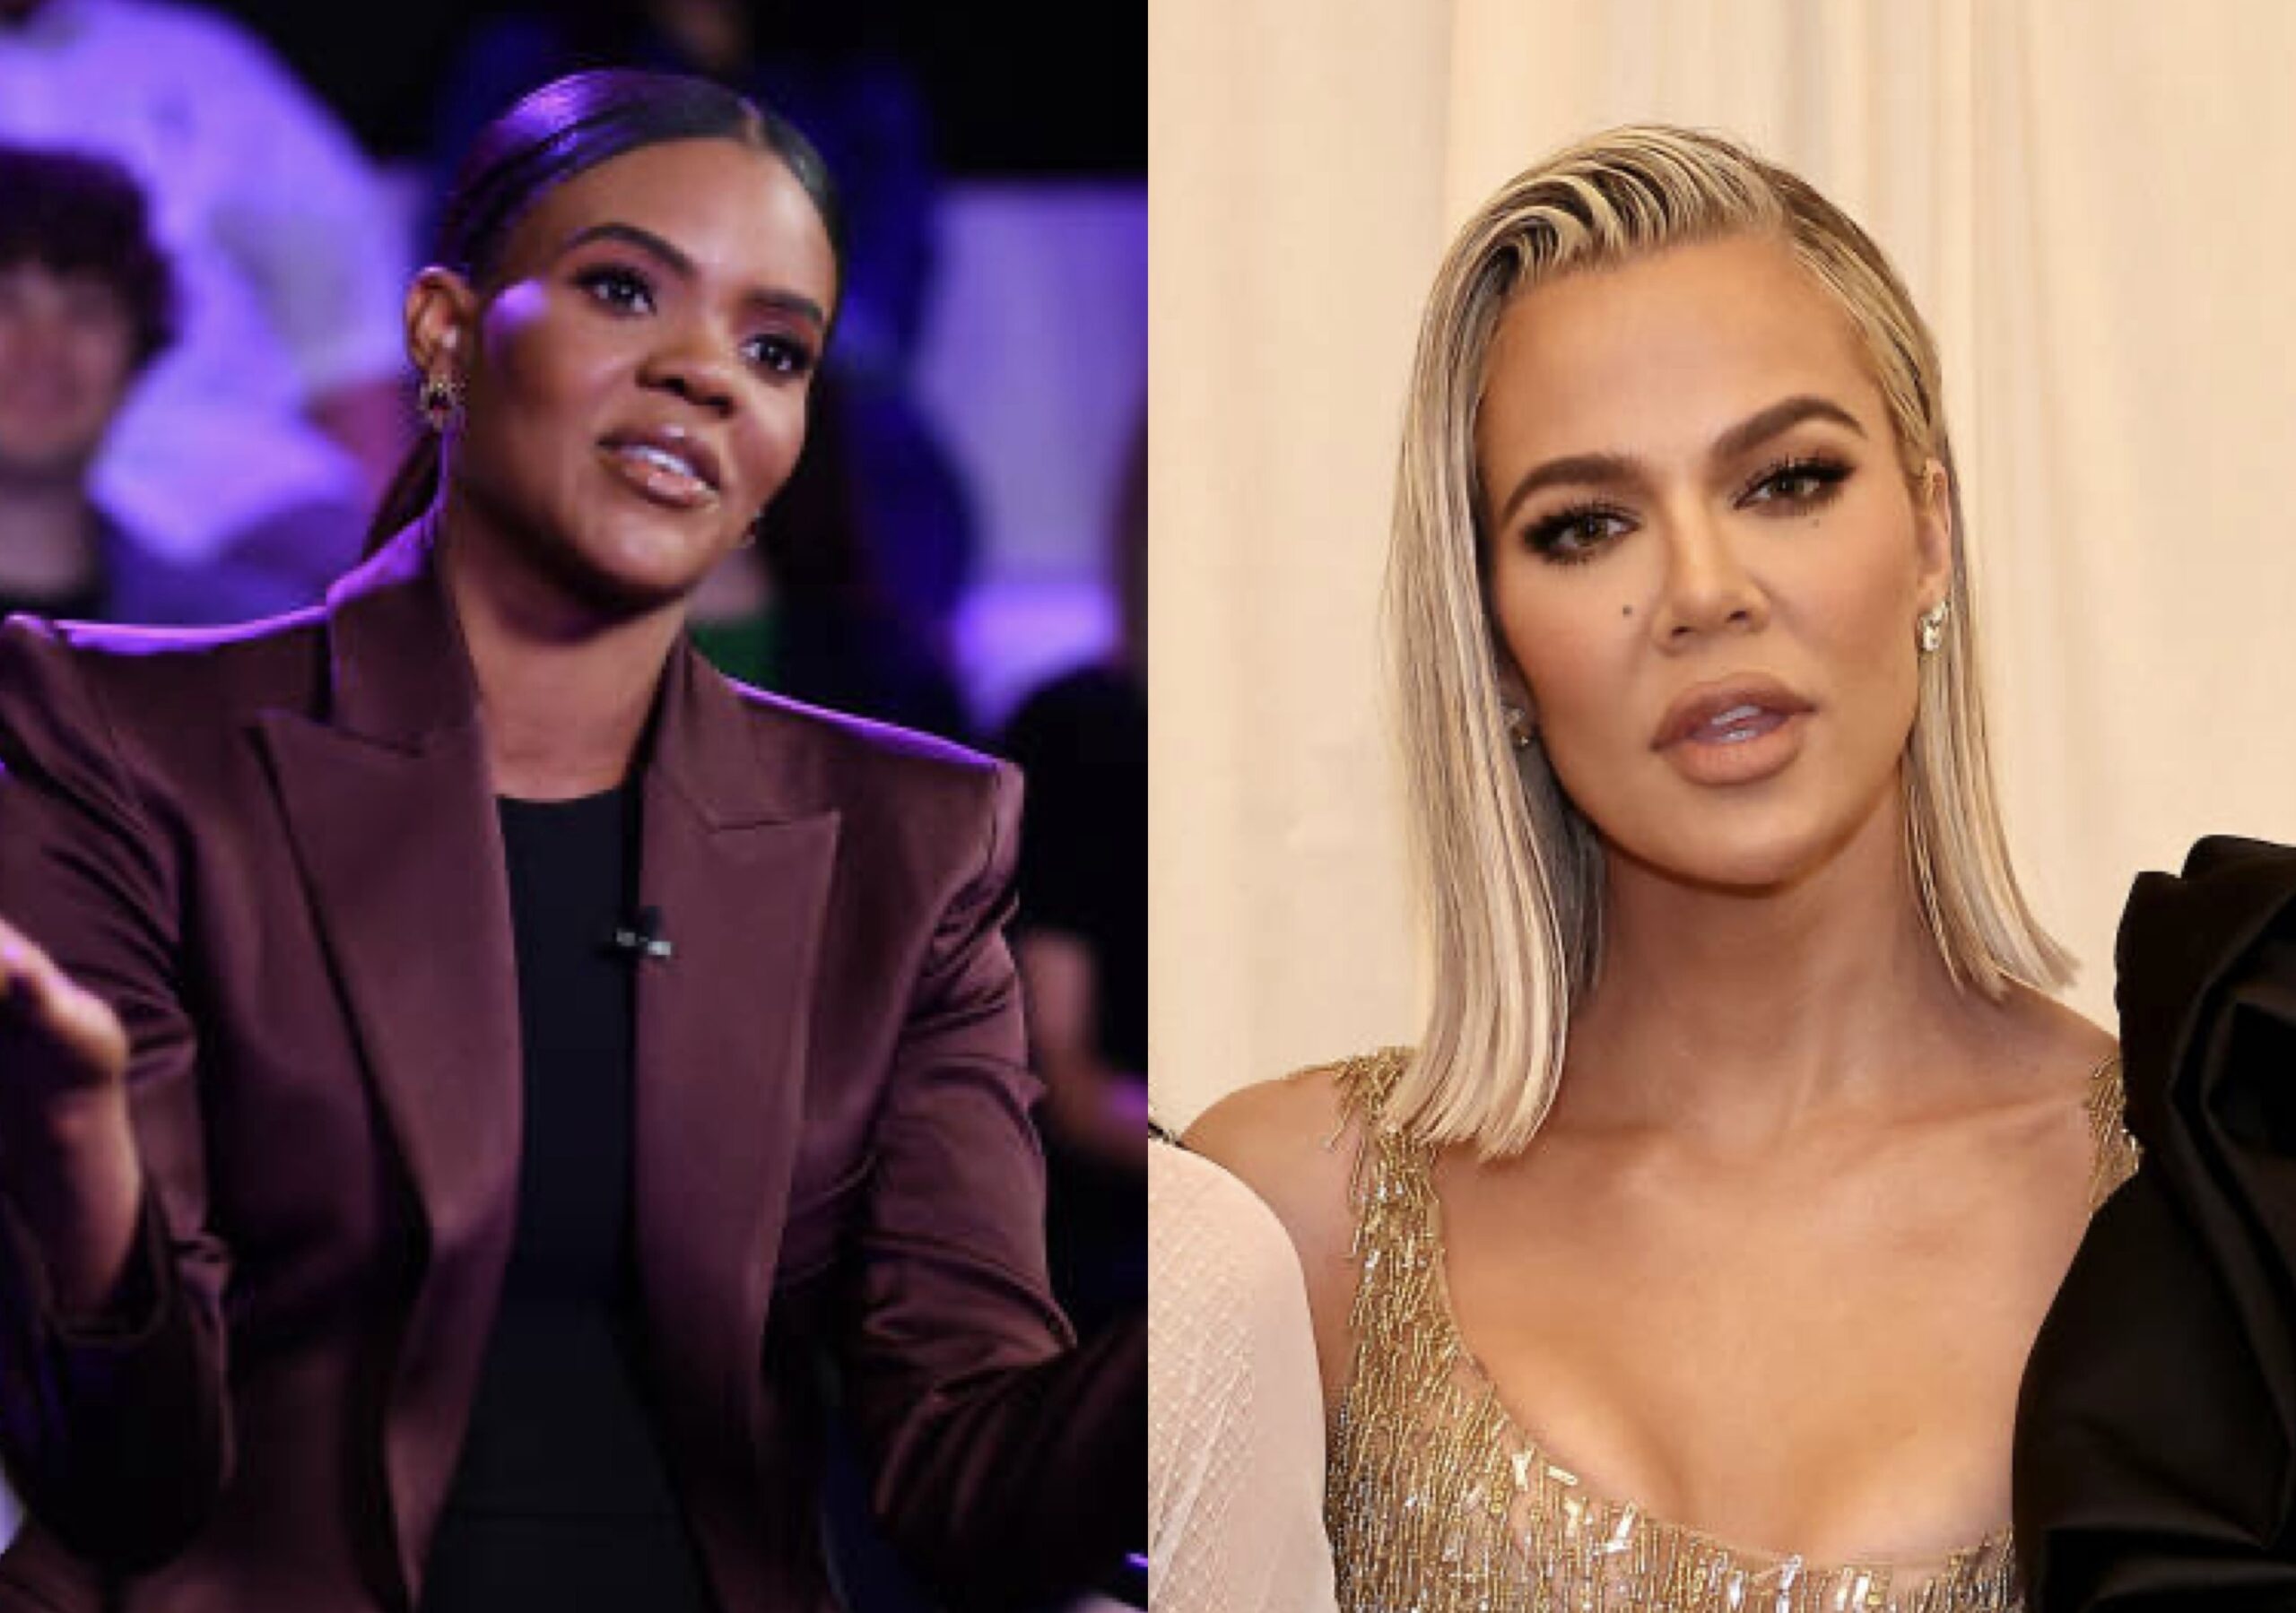 Candace Owens Thanks Khloe Kardashian For Shedding 'Light On The Unethical Practice' Of Surrogacy: "It's The Highest Paying Form Of Prostitution"